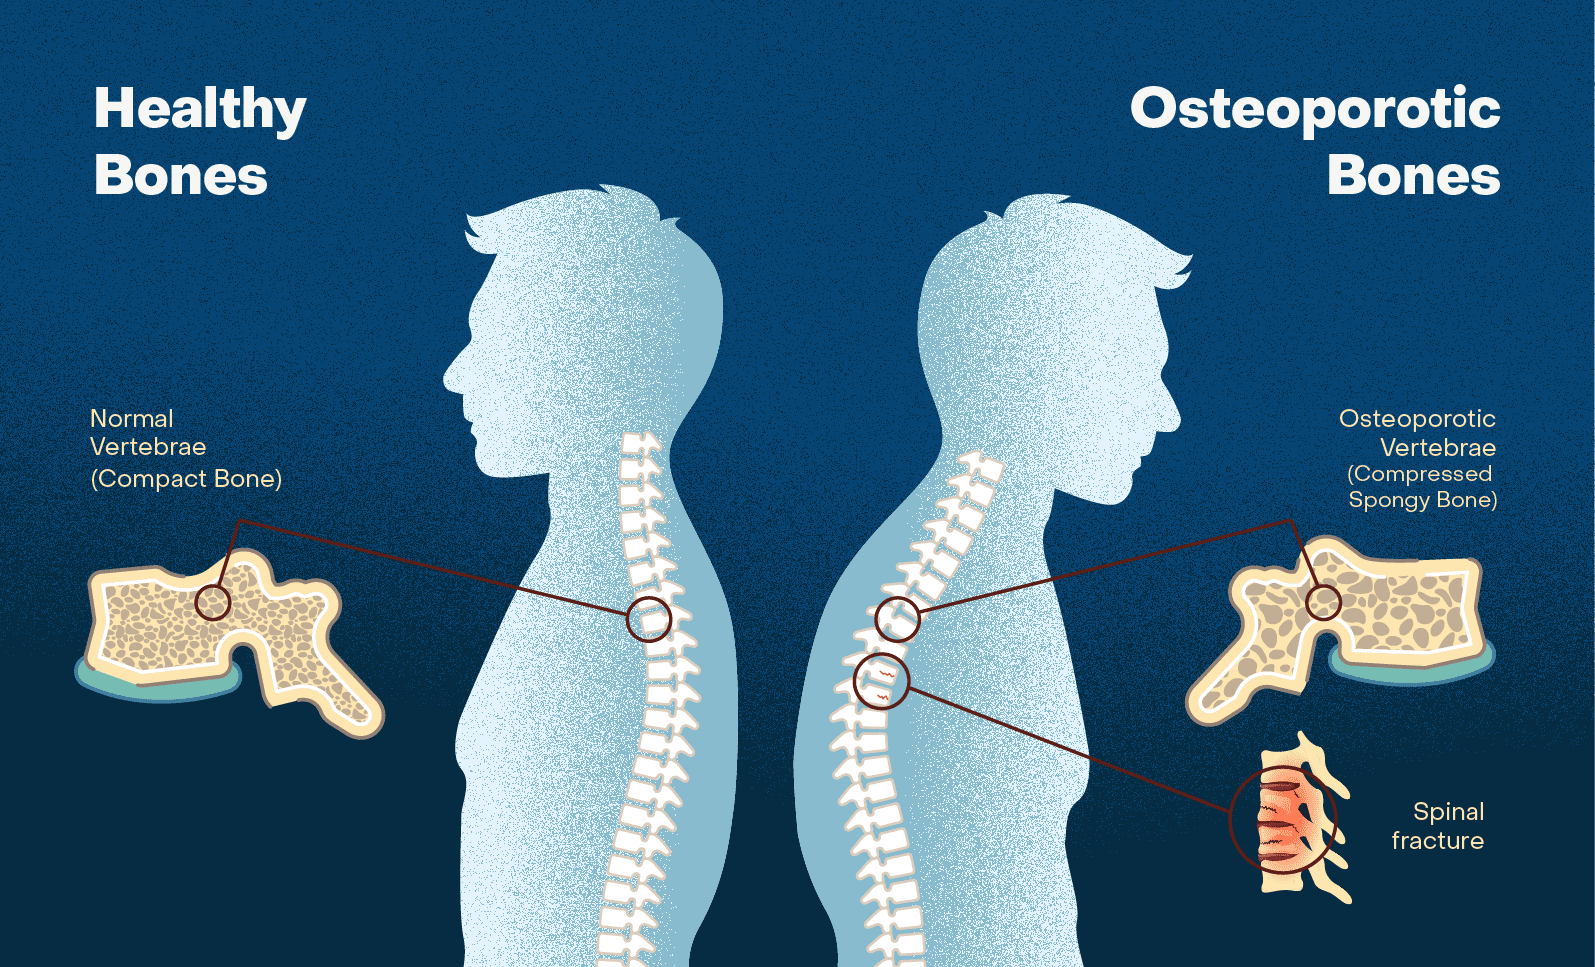 A description of the difference between healthy bones and bones with osteoporosis